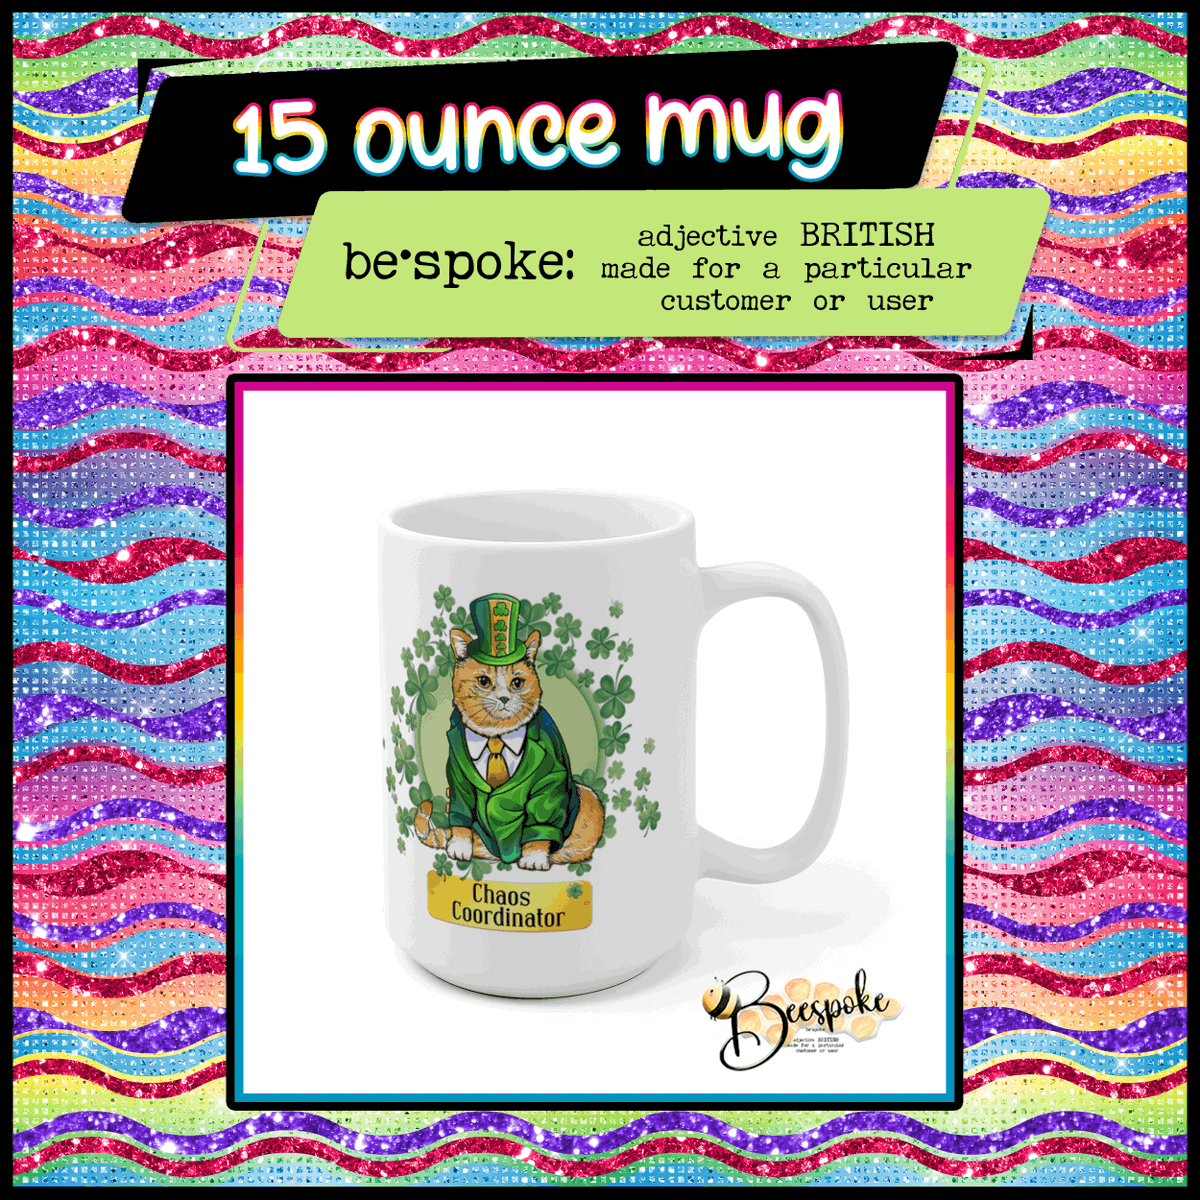 ☘️Grab your St. Patrick's Day mugs now!!  Hurry to our shop and see all the great designs.☘️

#stpatricksday #shamrock #beespokebylaura #stpattys #stpatricksdaymug #stpatricksdaygifts #stpatricksdayclipart #chaoscoordinator #doglover #catlover